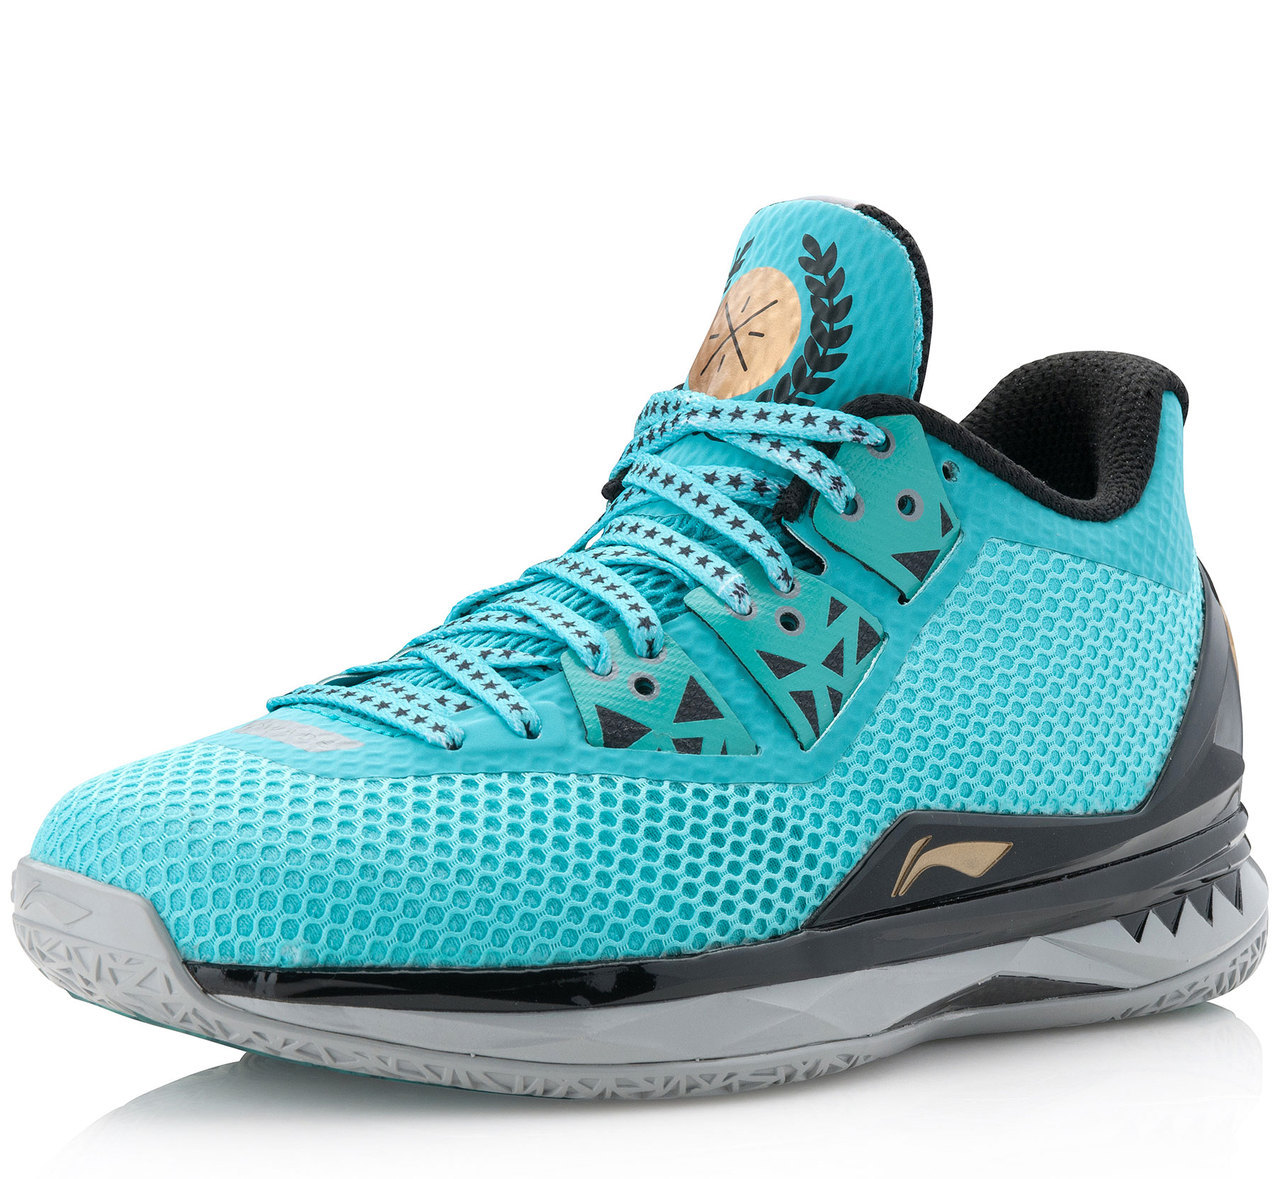 LiNing Way of Wade 4 'Liberty' Restock WearTesters